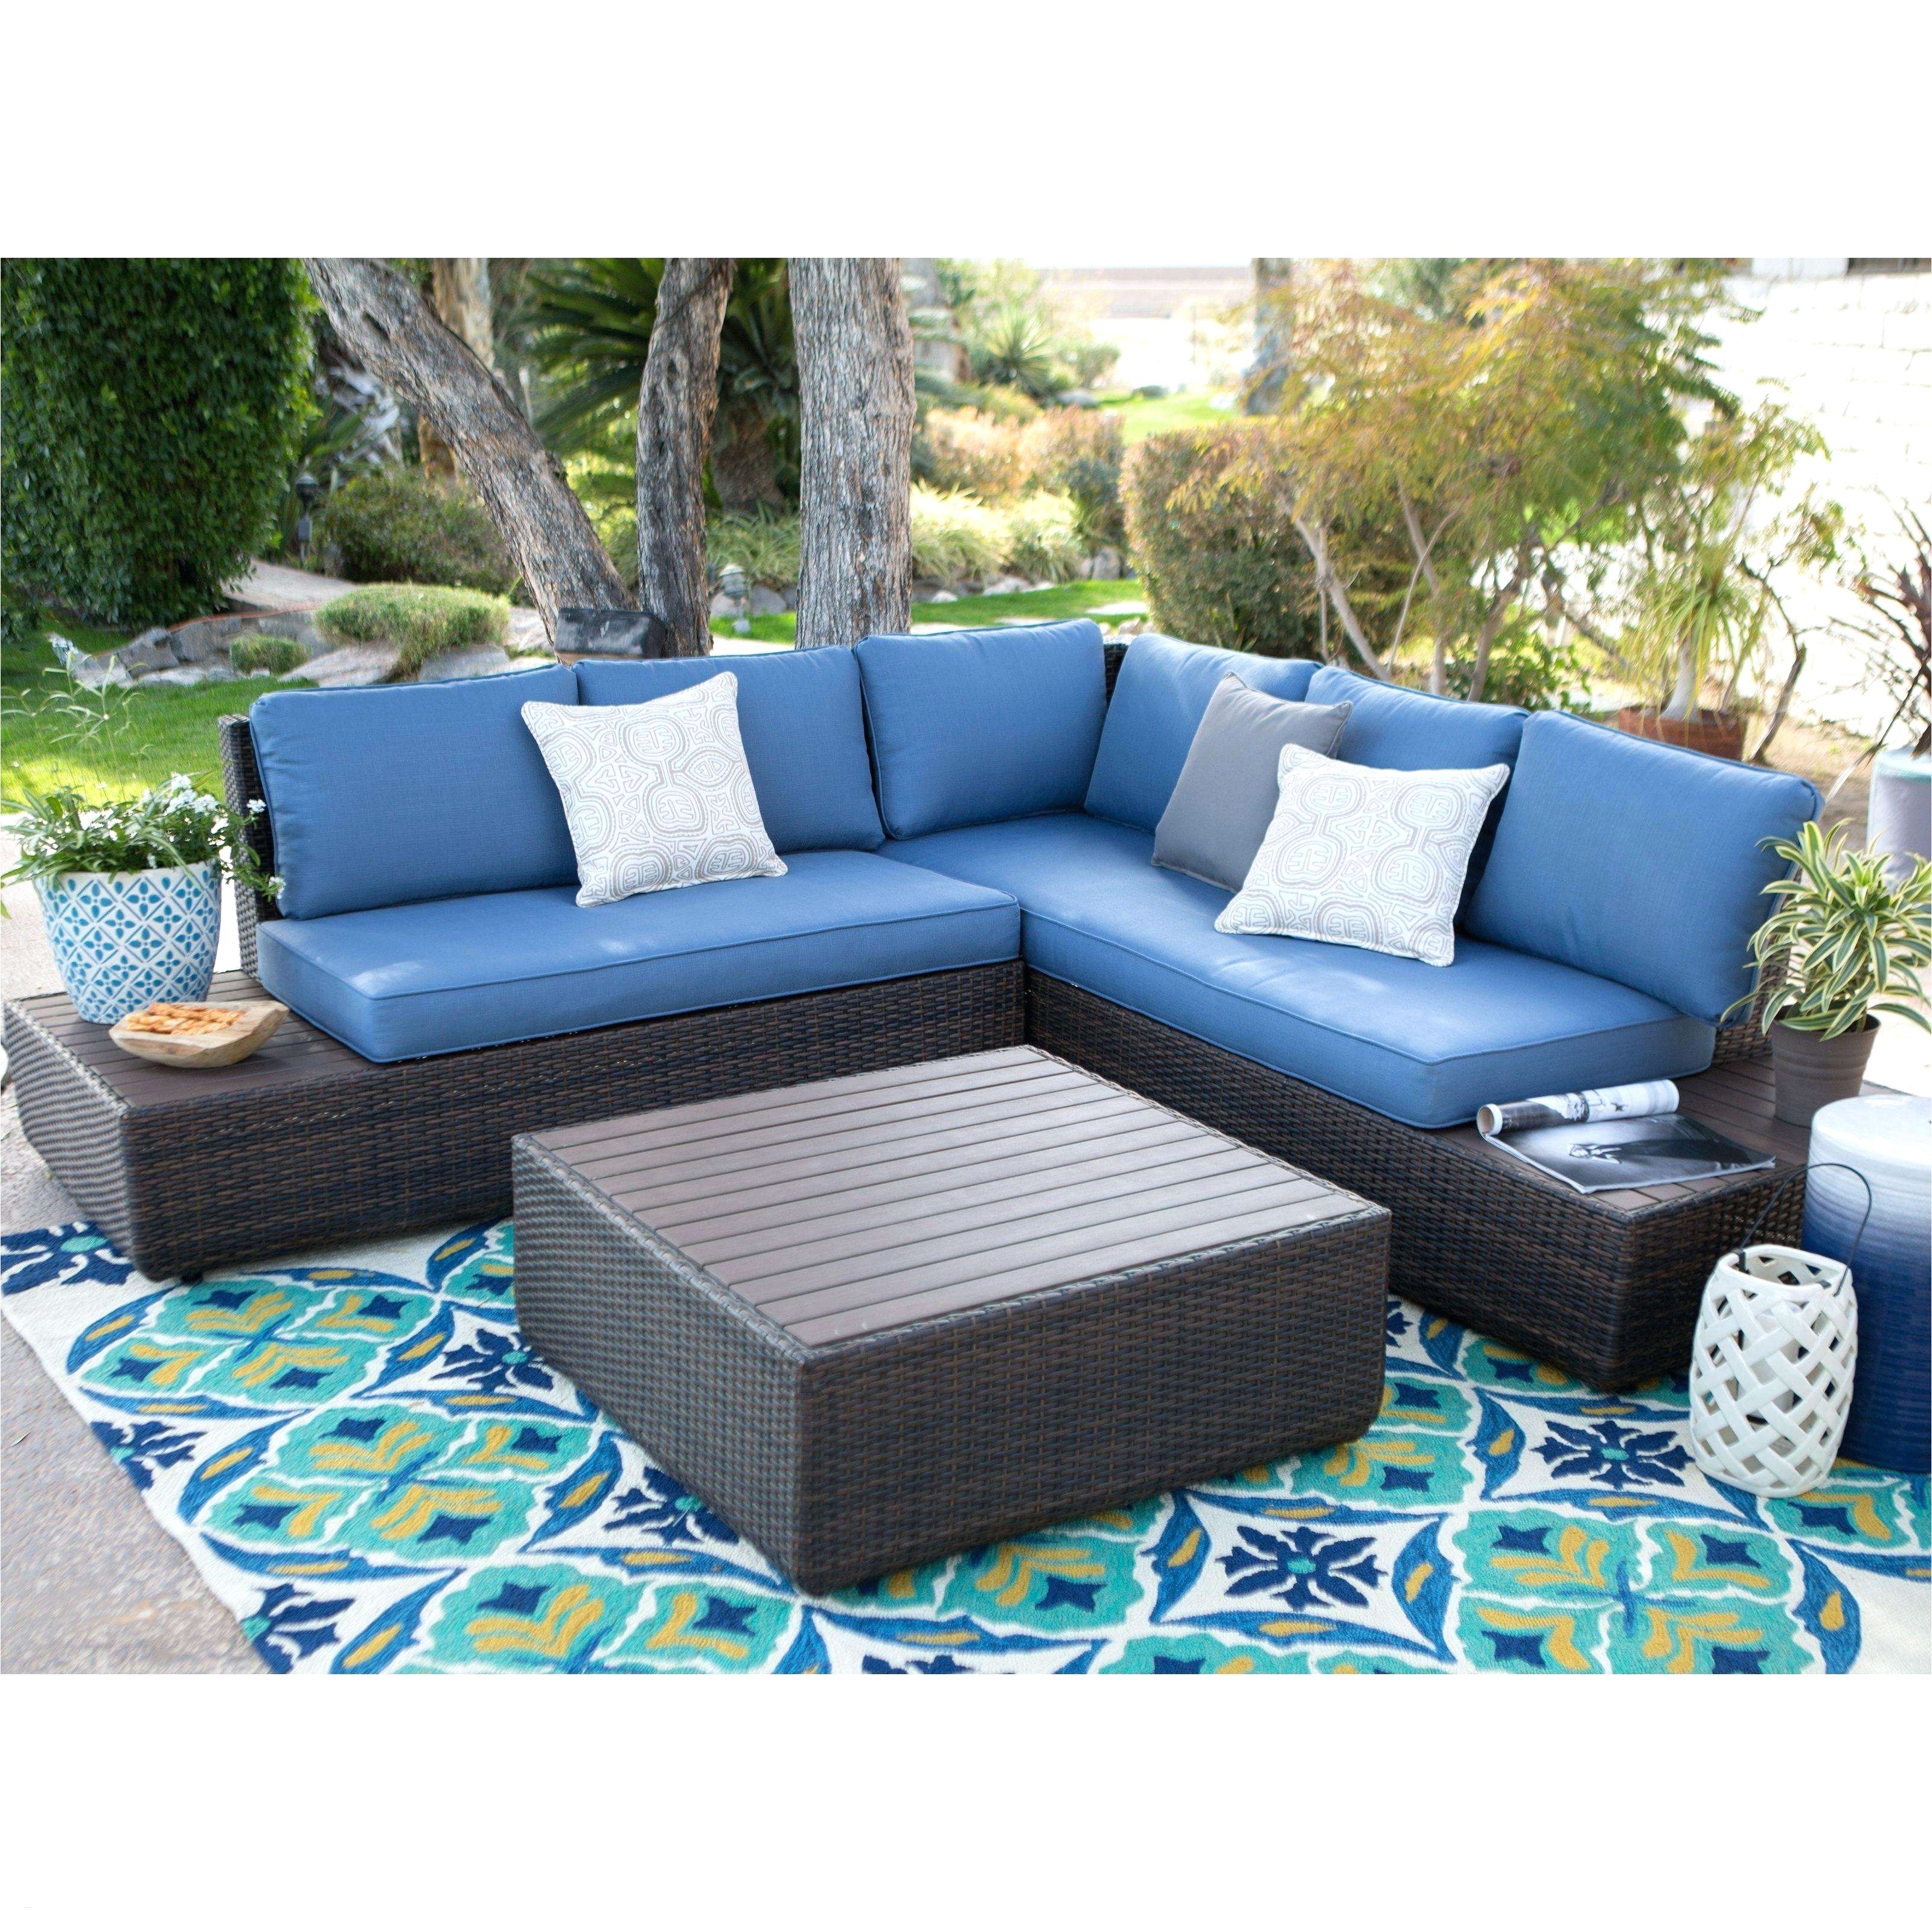 Sofas at Target Stores Outdoor Cushions Target Fresh Patio Bench Cushions Unique Wicker